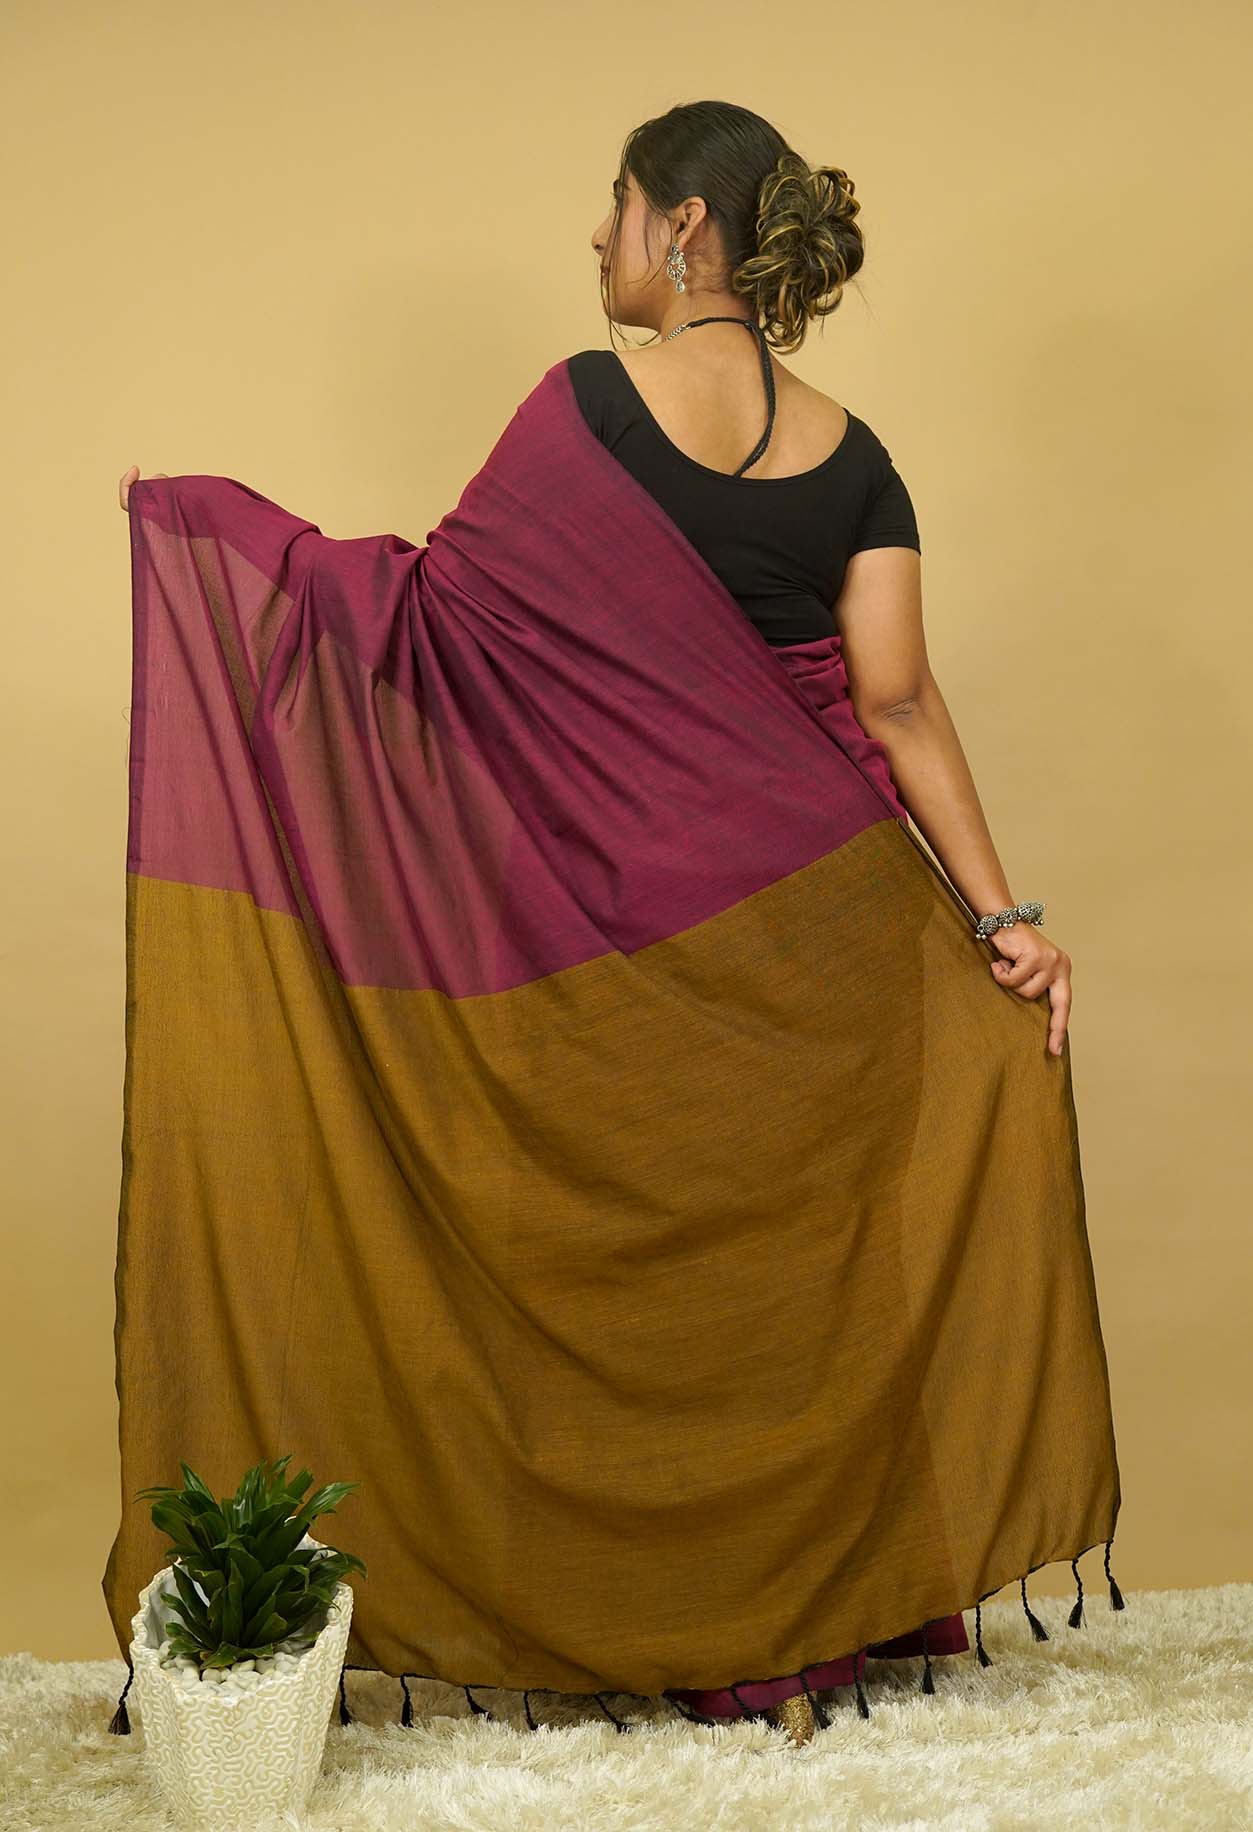 Ready To Wear Saree With Musturd Yellow Pallu Khadi Cotton Wrap In One Minute Saree